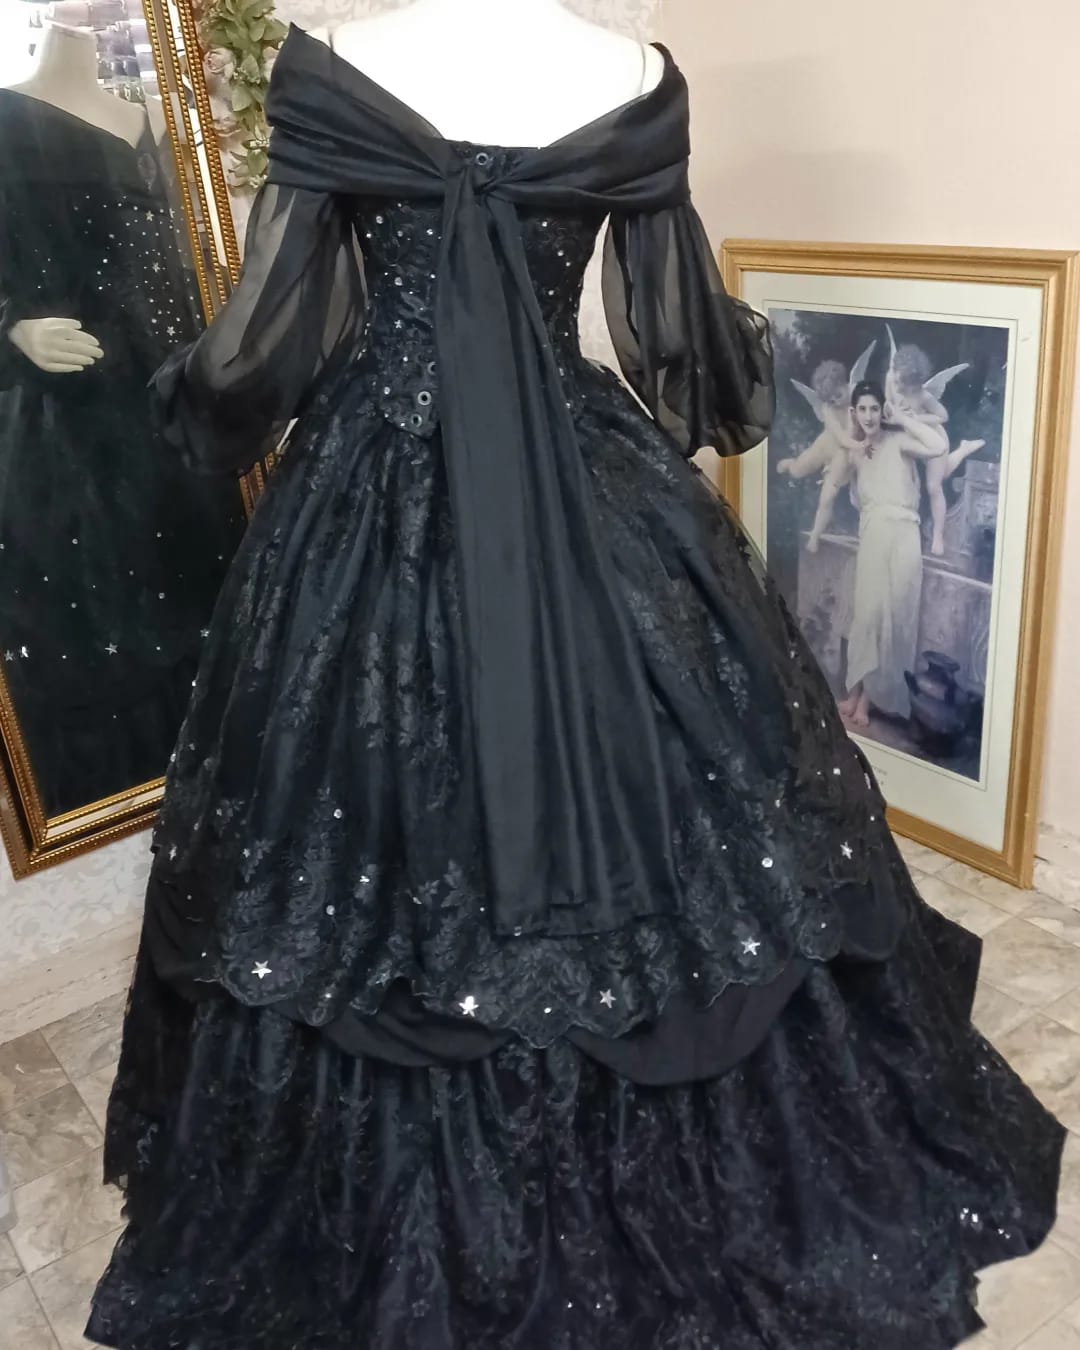 10 Dresses That Will Make You The Bell Of The Ball | Ball gowns, Black  wedding dresses, Gothic prom dress